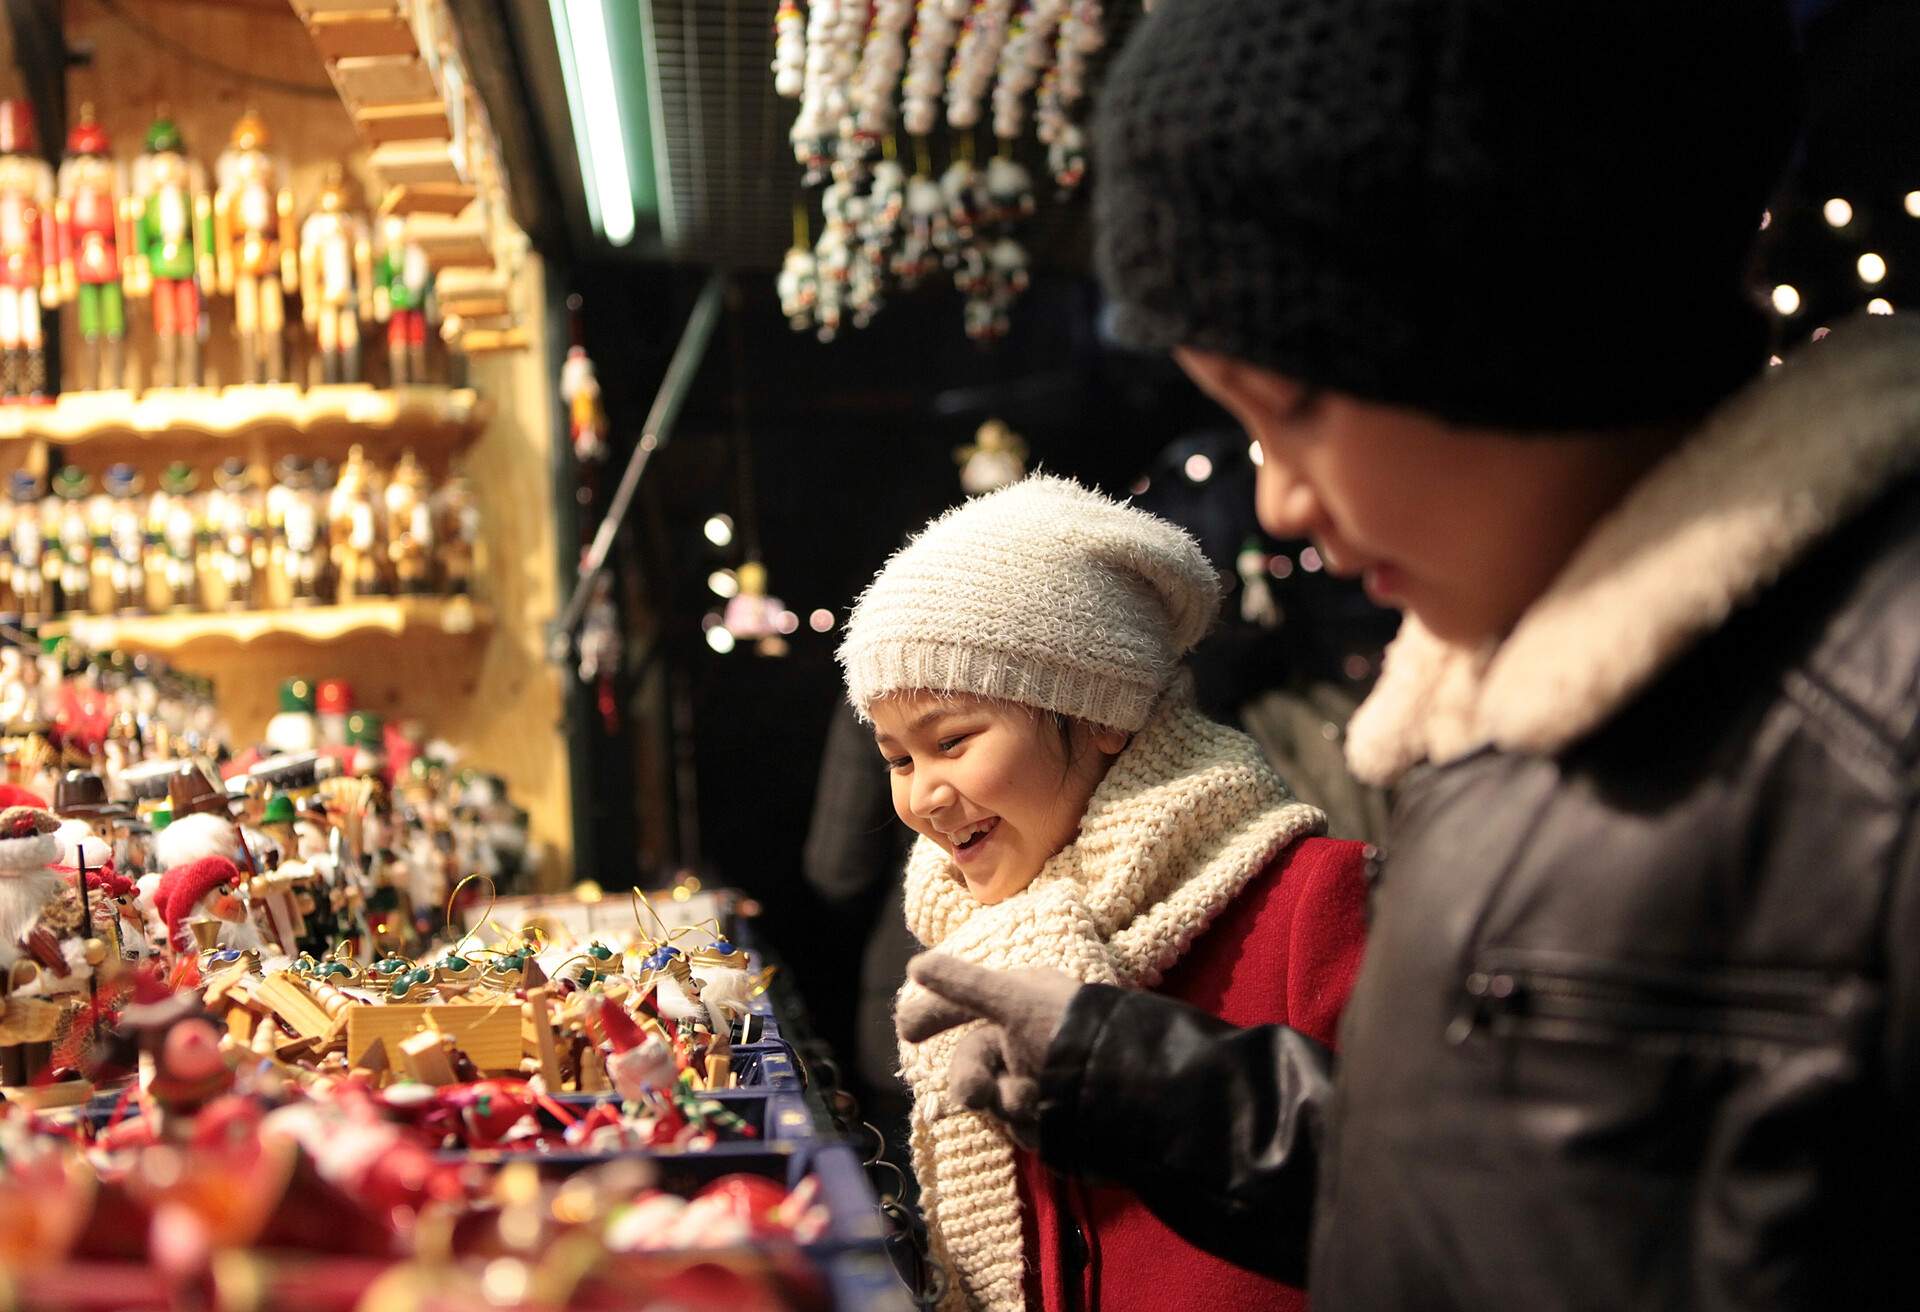 Two children in warm clothing looking at ornaments being sold at a Christmas market.